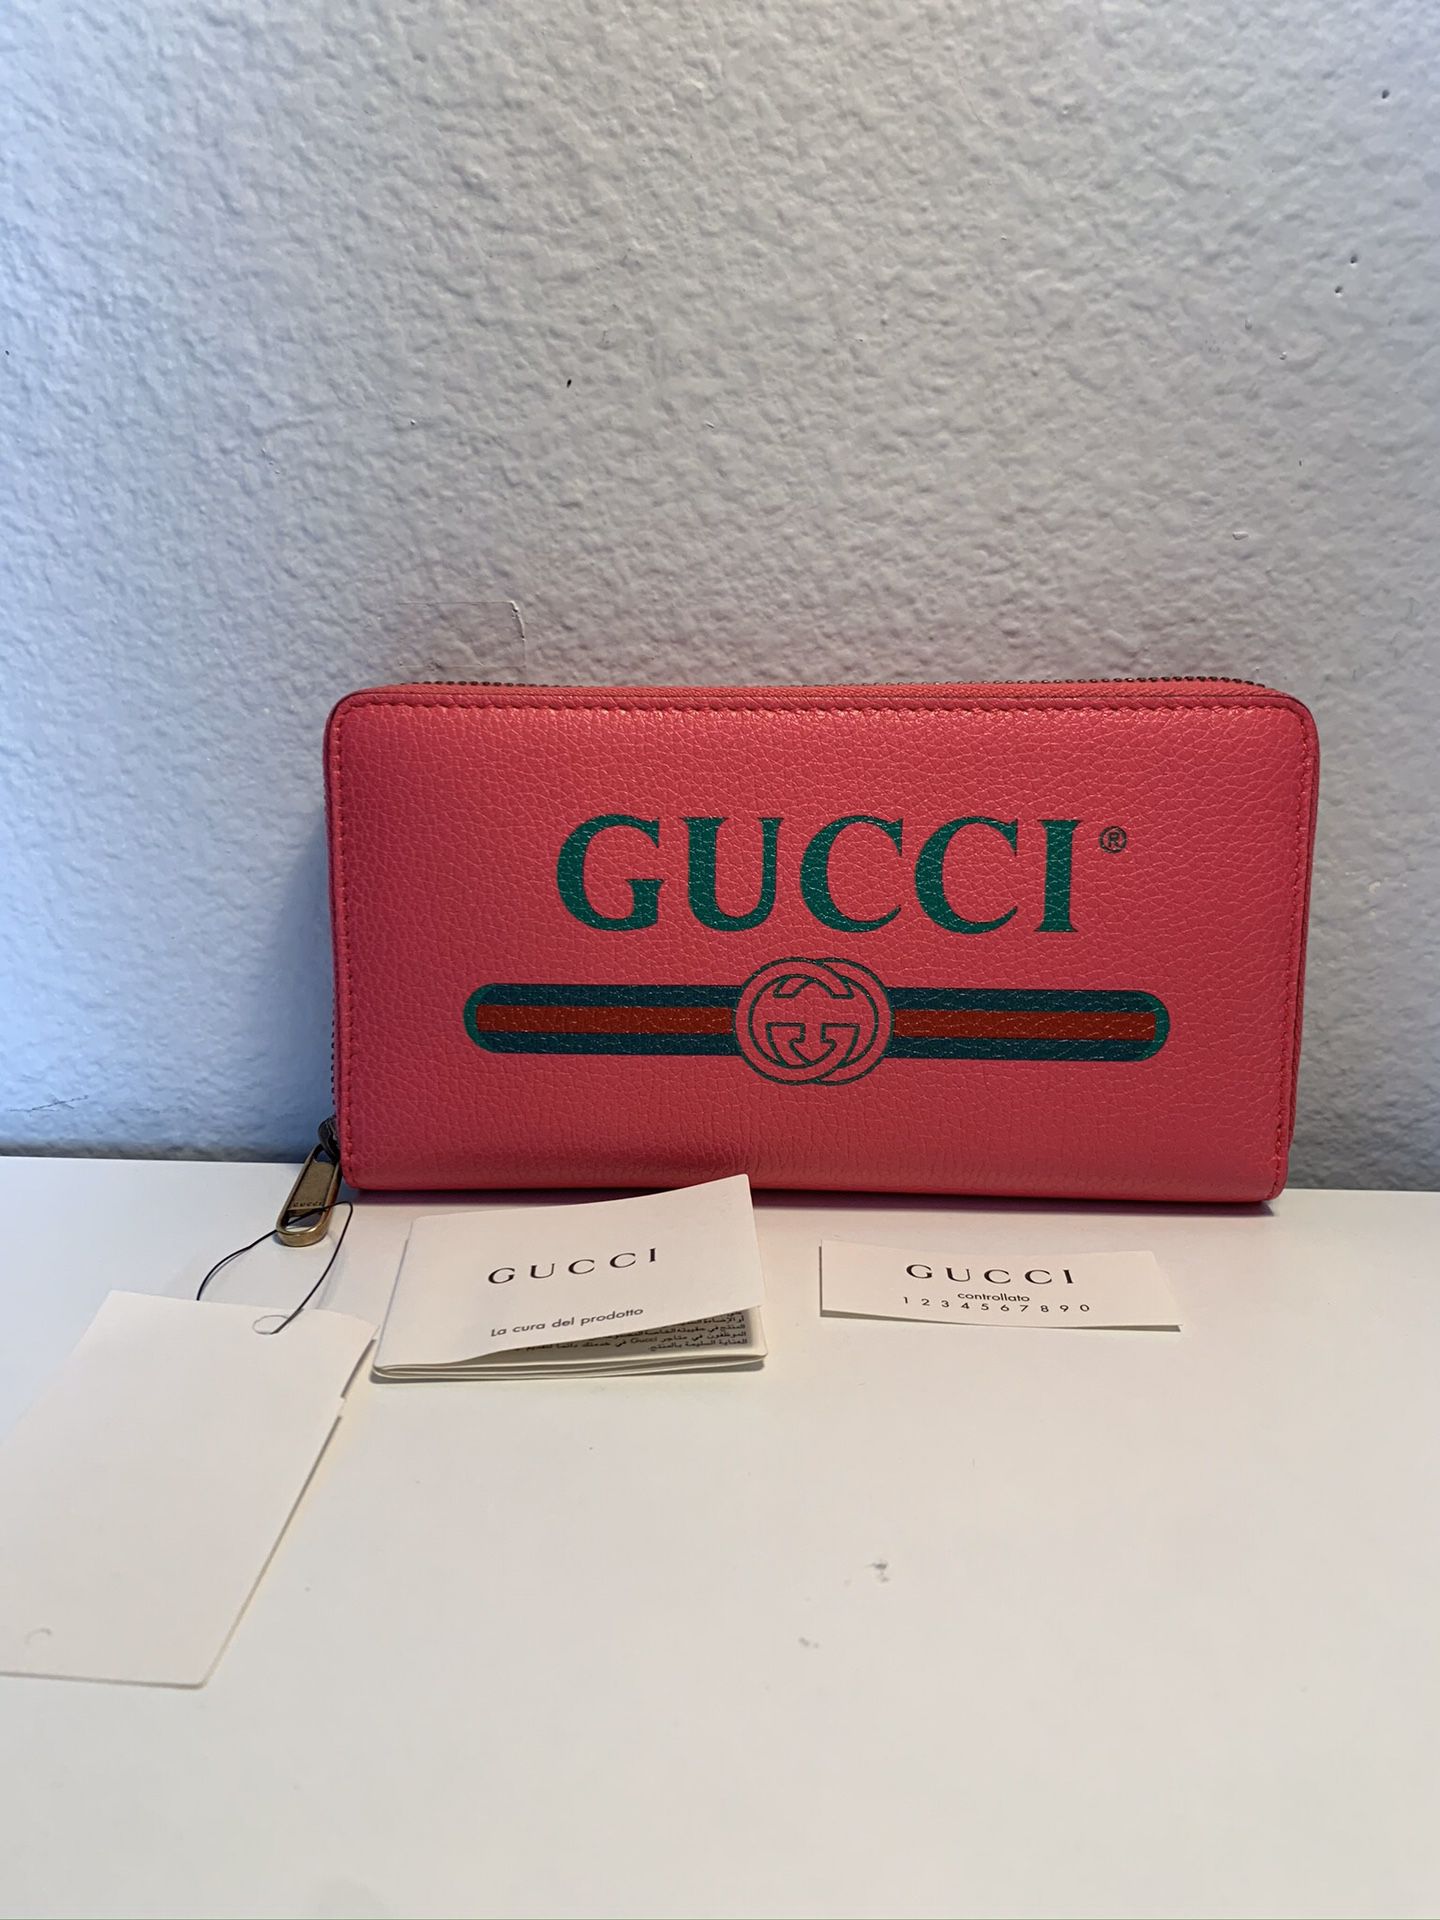 NWT GUCCI Print Logo Pink Green Red Leather Long Wallet Zip Around $798